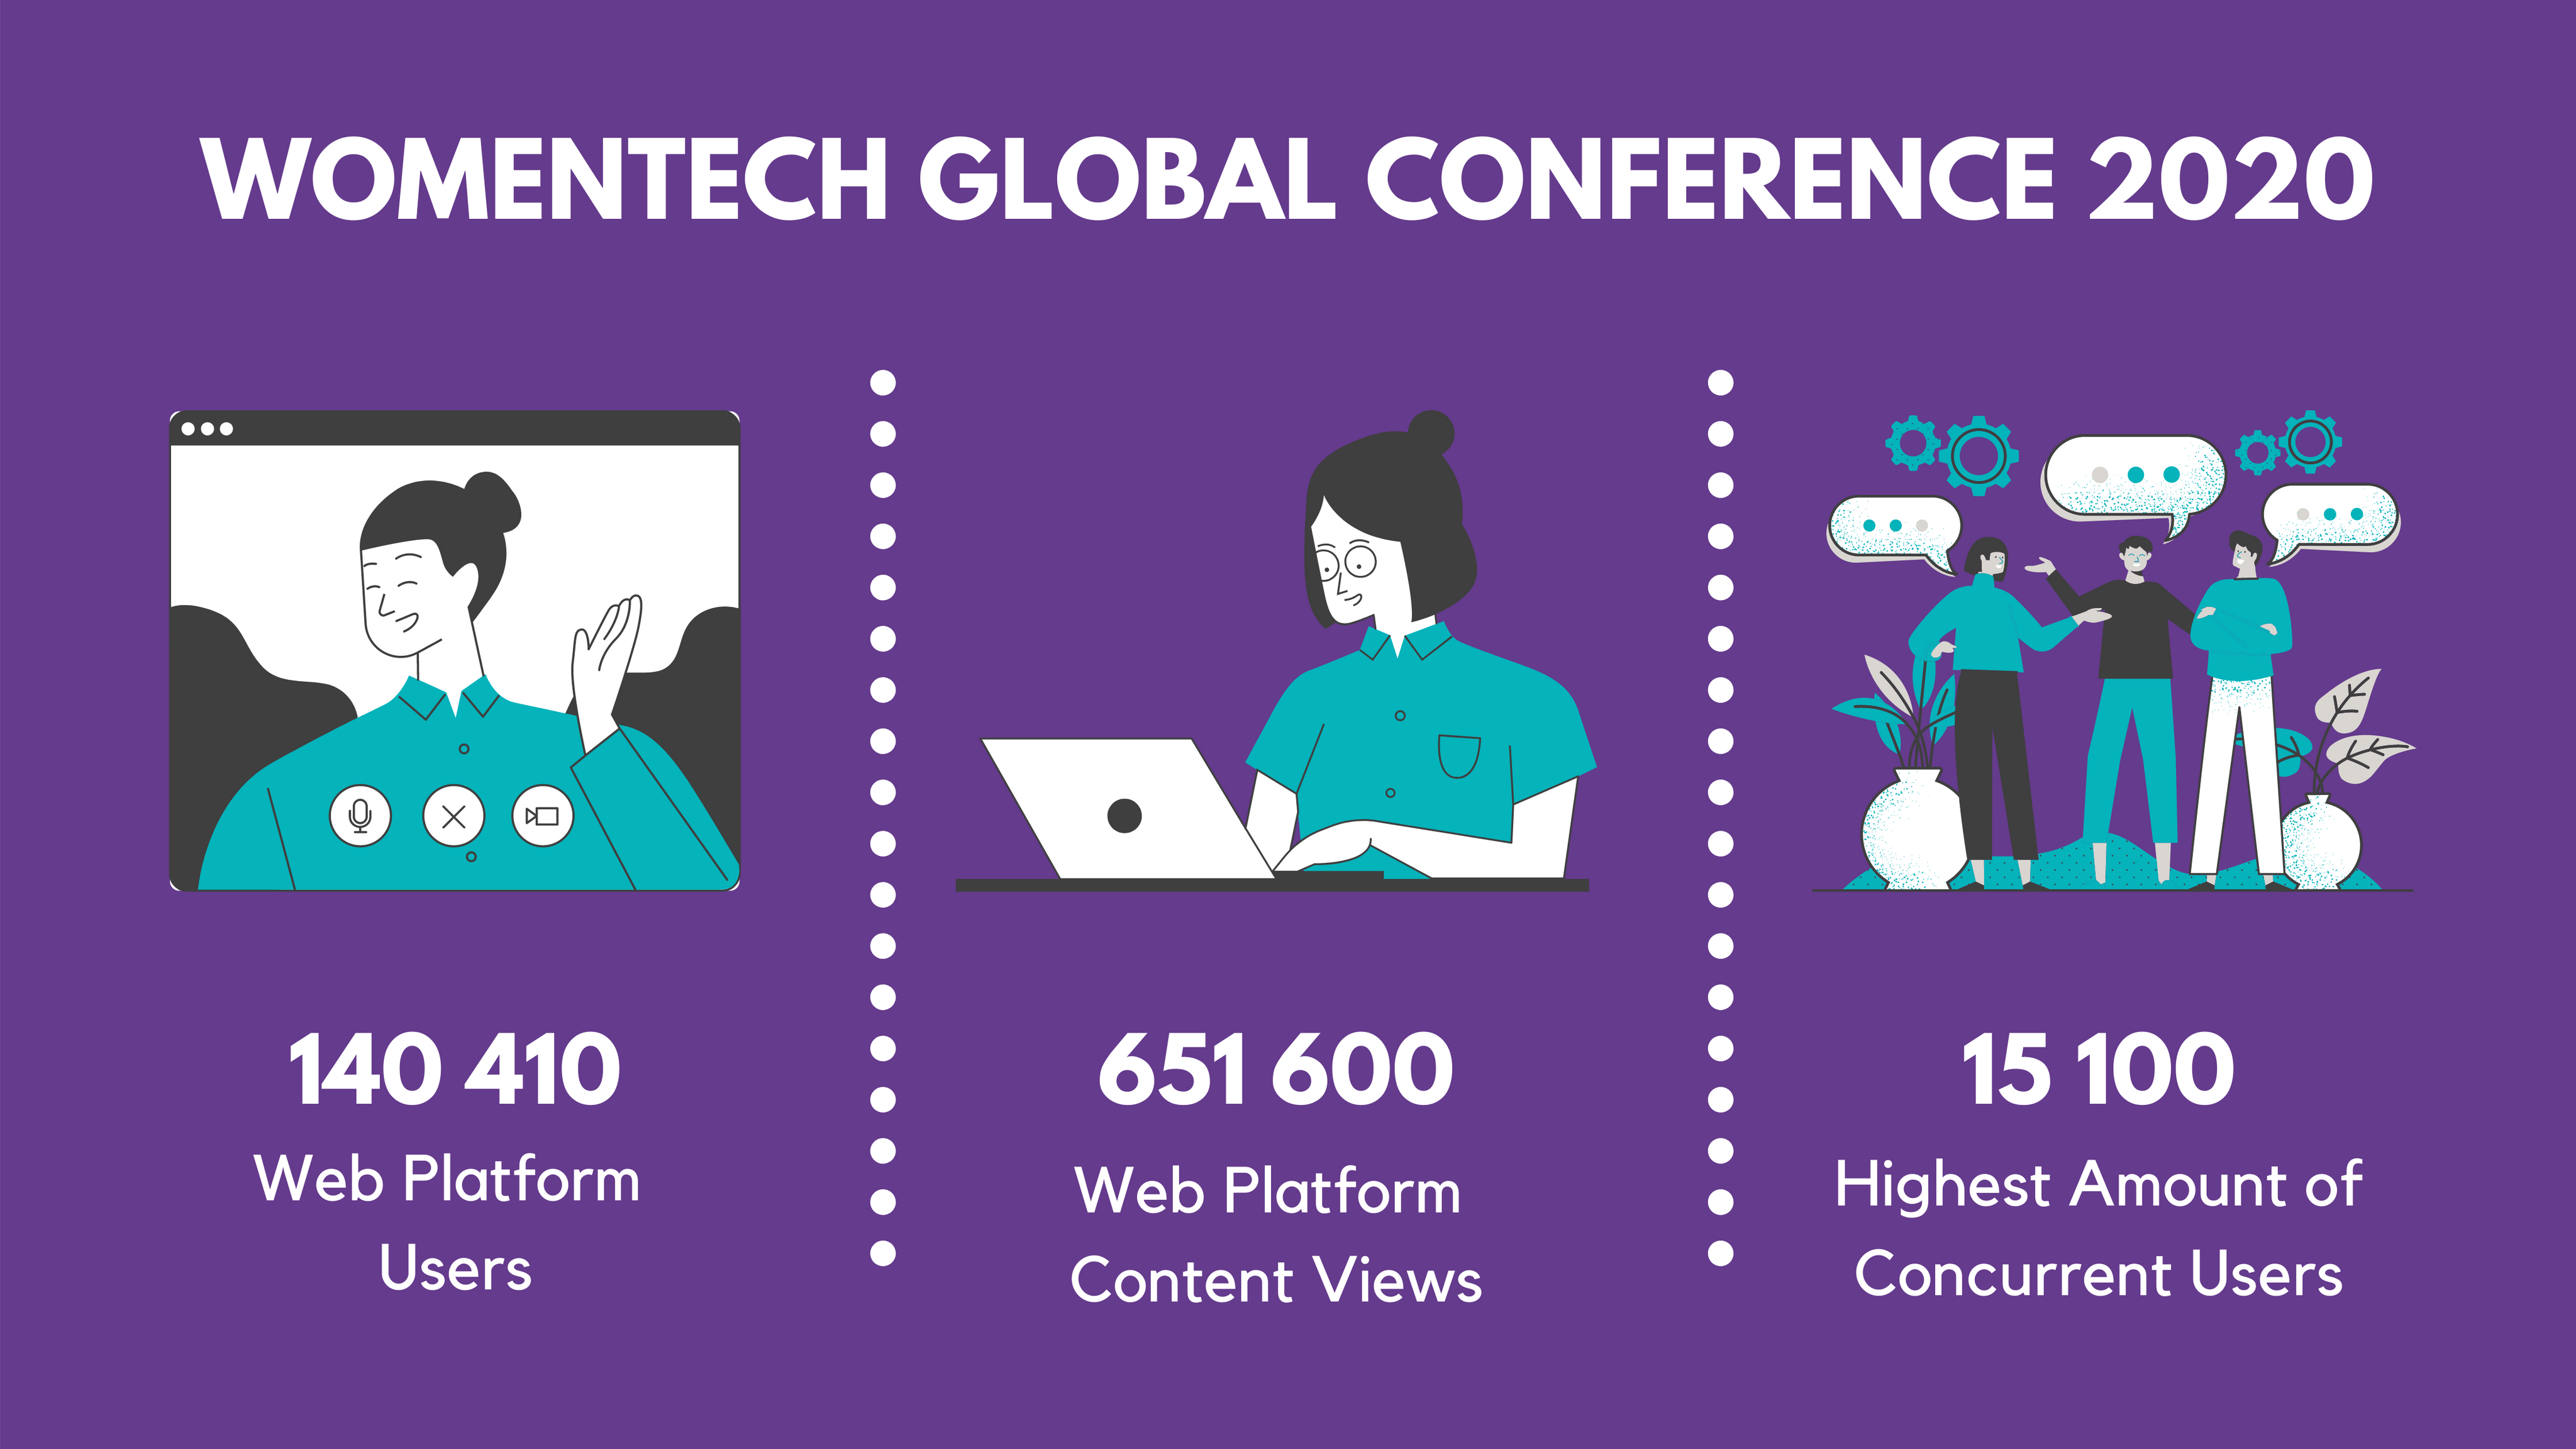 WomenTech Global Conference 2020 Platform Results